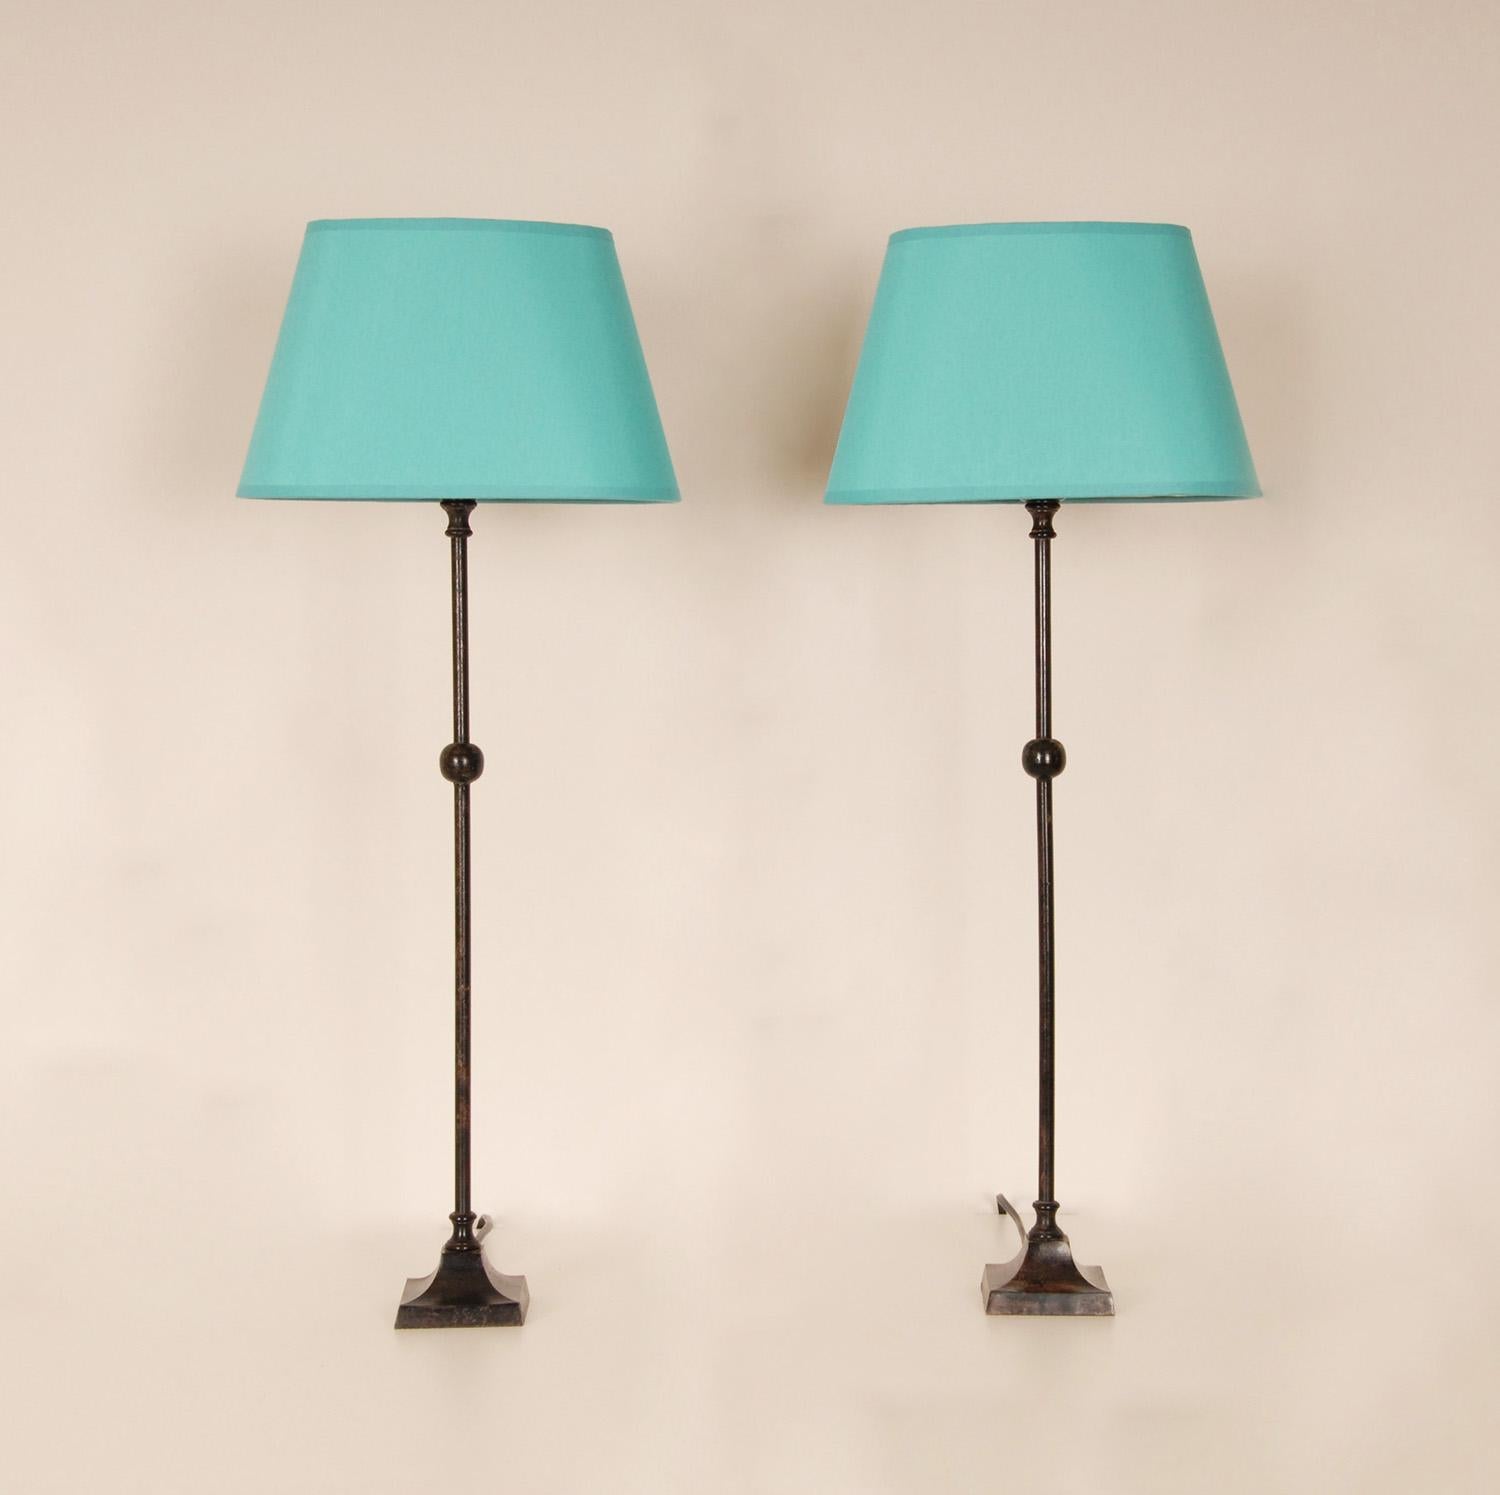 French Mid Century Table lamps Wrought Iron Black and Turquoise Modern Lamps a Pair